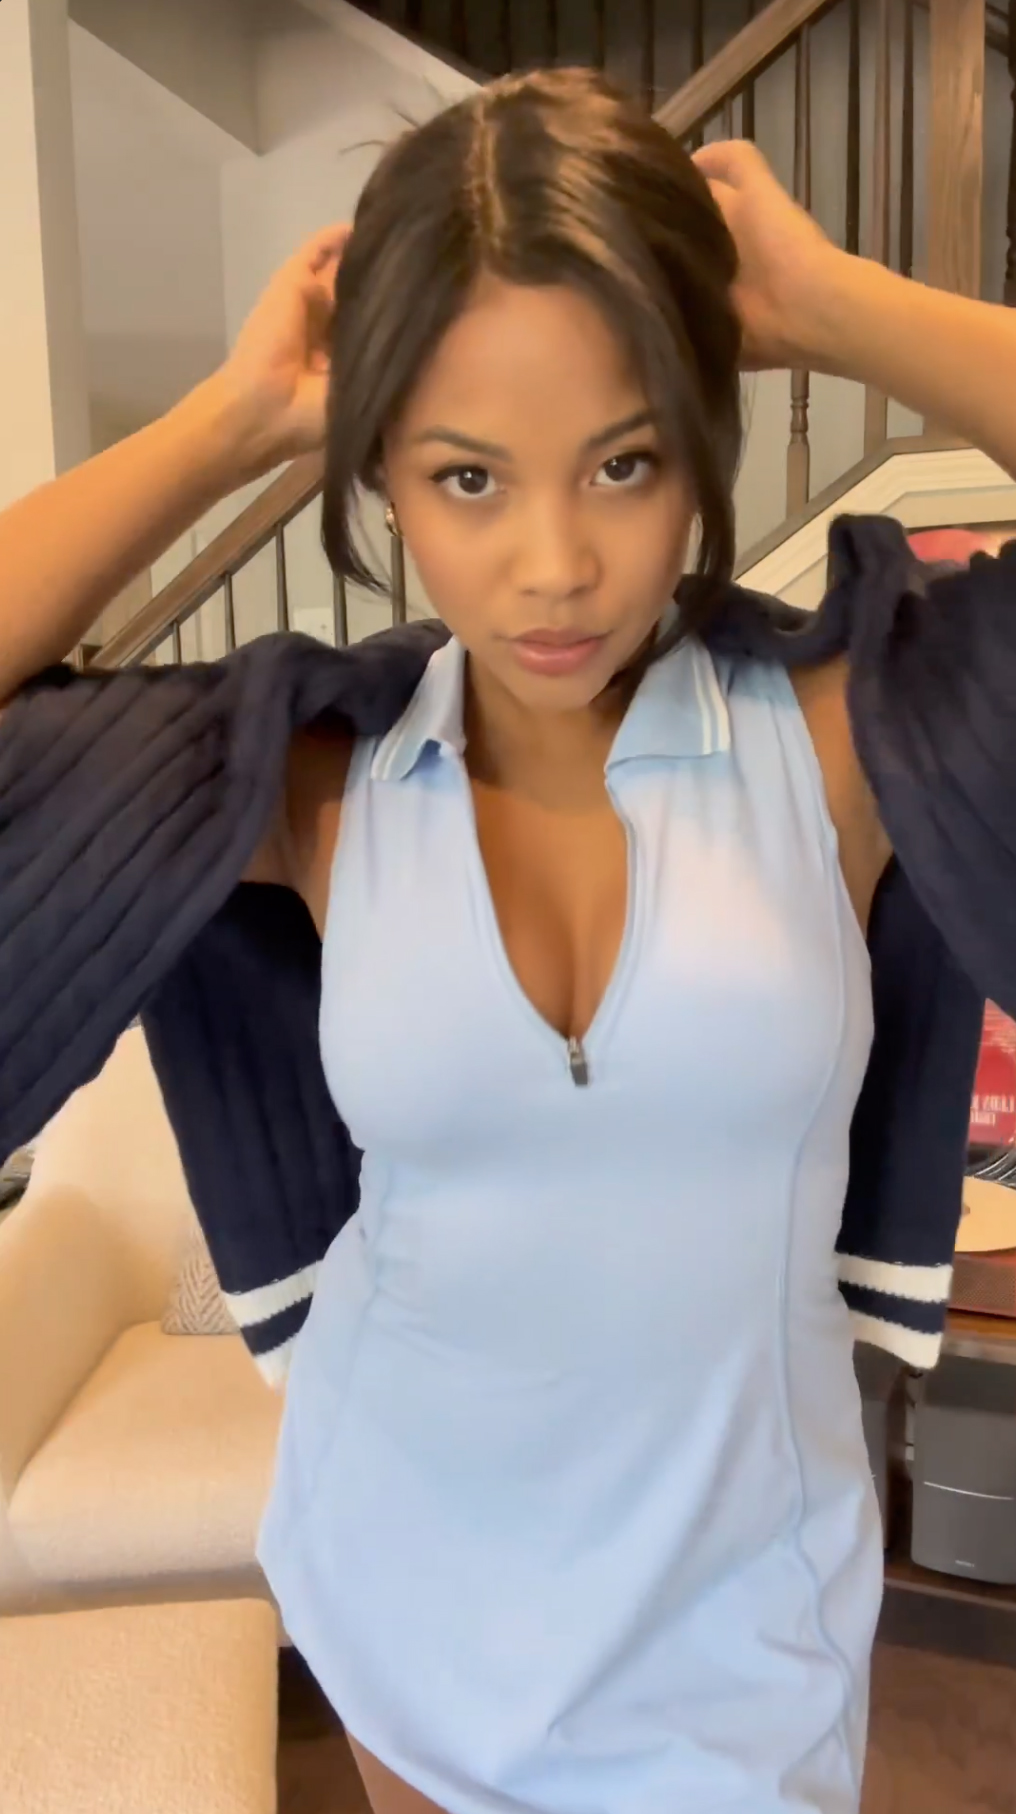 The social media star showed off her latest golf outfit